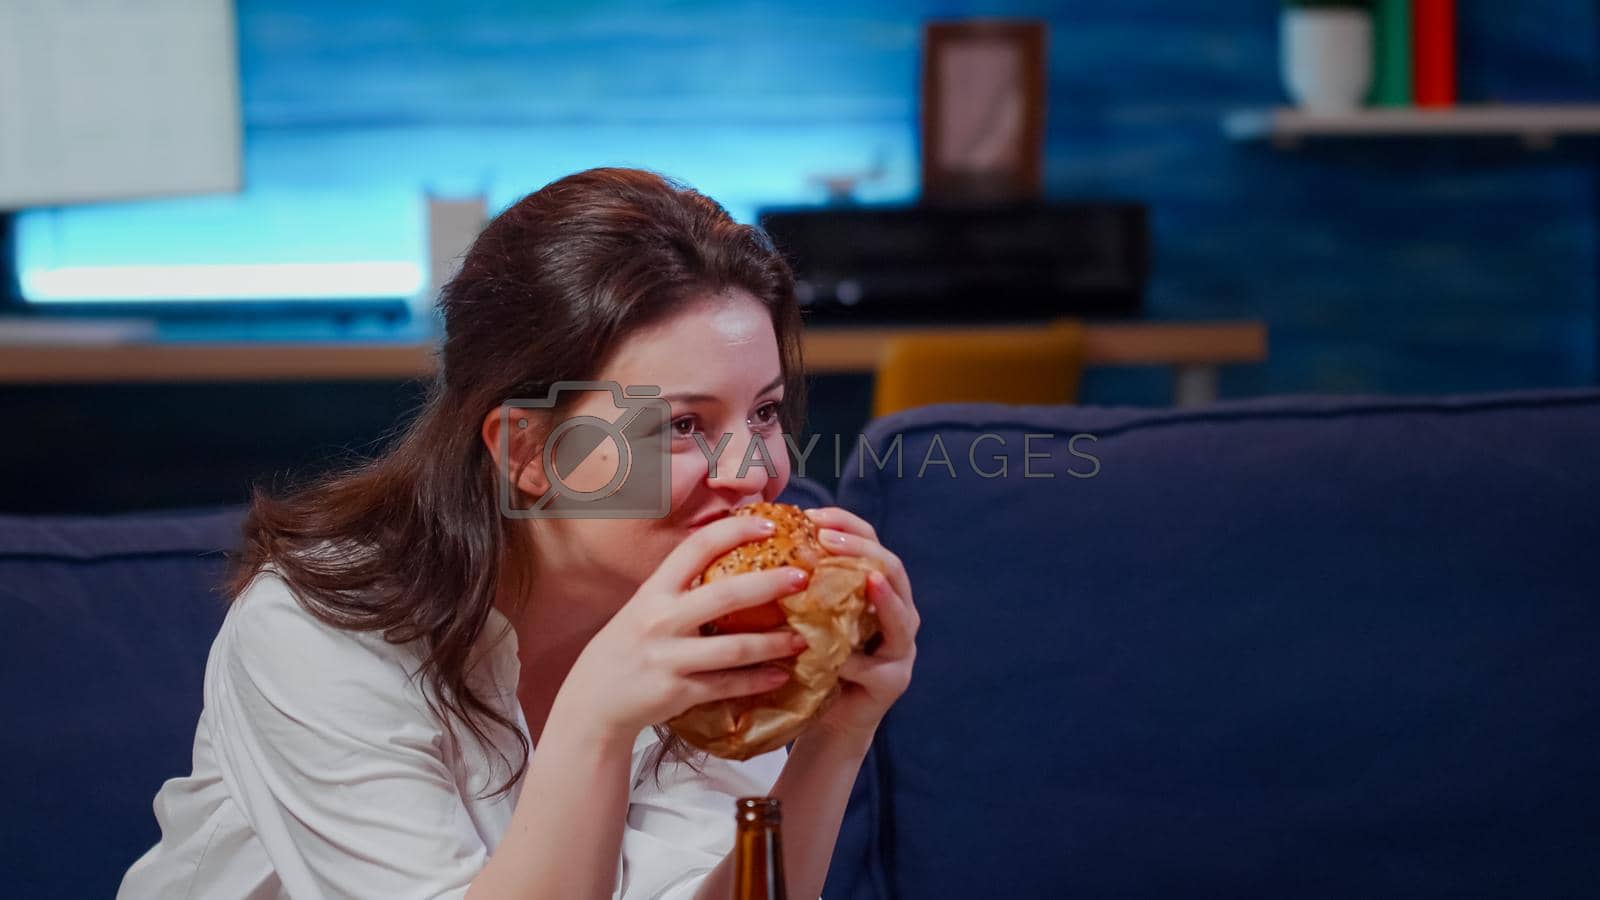 Royalty free image of Young person laughing at TV while eating hamburger by DCStudio